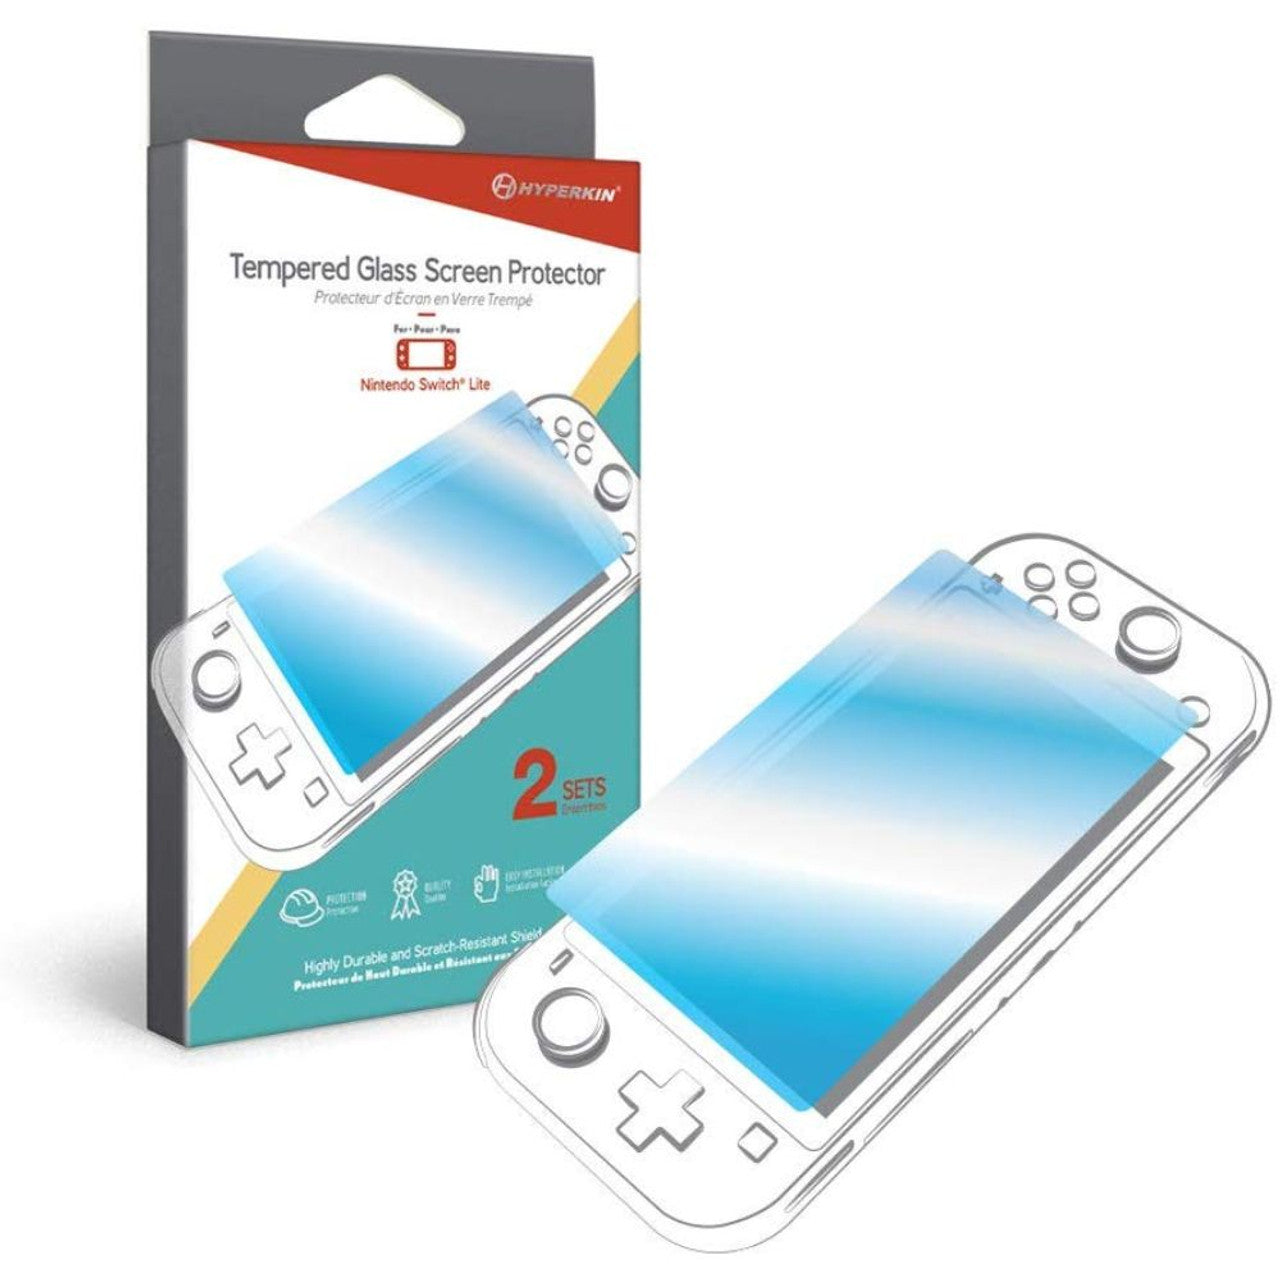 Switch Lite Tempered Glass Screen Protector Hyperkin (2-Sets)